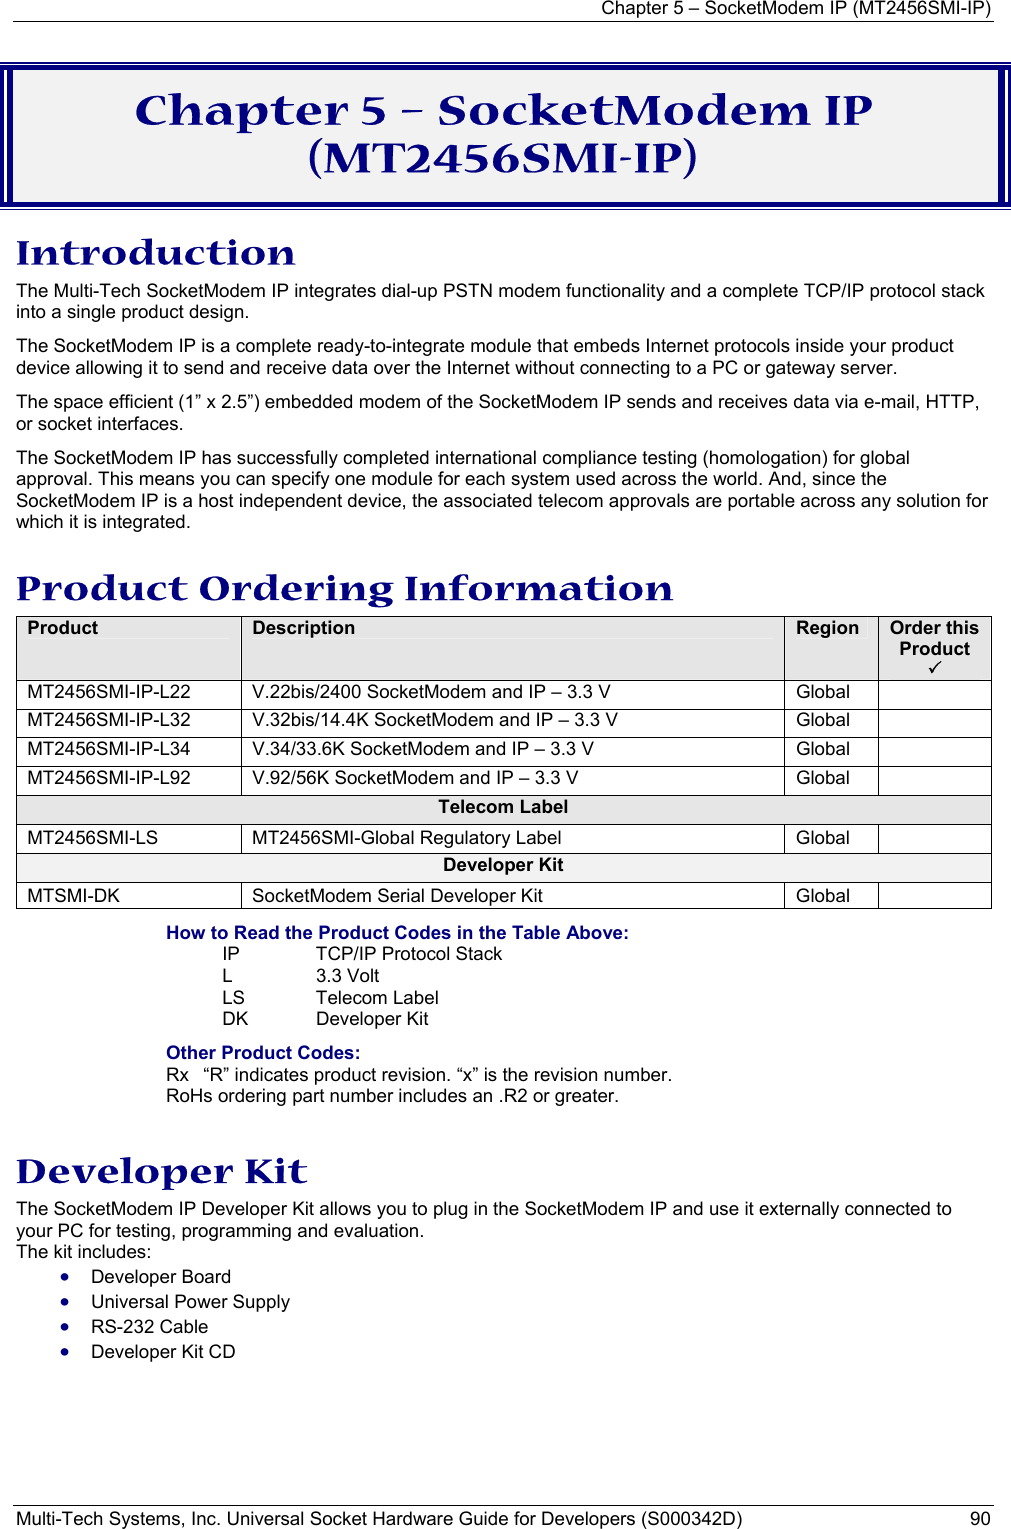 Chapter 5 – SocketModem IP (MT2456SMI-IP) Multi-Tech Systems, Inc. Universal Socket Hardware Guide for Developers (S000342D)  90  Chapter 5 – SocketModem IP (MT2456SMI-IP) Introduction The Multi-Tech SocketModem IP integrates dial-up PSTN modem functionality and a complete TCP/IP protocol stack into a single product design.  The SocketModem IP is a complete ready-to-integrate module that embeds Internet protocols inside your product device allowing it to send and receive data over the Internet without connecting to a PC or gateway server.  The space efficient (1” x 2.5”) embedded modem of the SocketModem IP sends and receives data via e-mail, HTTP, or socket interfaces.  The SocketModem IP has successfully completed international compliance testing (homologation) for global approval. This means you can specify one module for each system used across the world. And, since the SocketModem IP is a host independent device, the associated telecom approvals are portable across any solution for which it is integrated. Product Ordering Information Product  Description  Region  Order this Product  3 MT2456SMI-IP-L22 V.22bis/2400 SocketModem and IP – 3.3 V       Global   MT2456SMI-IP-L32 V.32bis/14.4K SocketModem and IP – 3.3 V      Global   MT2456SMI-IP-L34 V.34/33.6K SocketModem and IP – 3.3 V      Global   MT2456SMI-IP-L92 V.92/56K SocketModem and IP – 3.3 V        Global   Telecom Label MT2456SMI-LS  MT2456SMI-Global Regulatory Label  Global   Developer Kit MTSMI-DK SocketModem Serial Developer Kit  Global   How to Read the Product Codes in the Table Above: IP  TCP/IP Protocol Stack L 3.3 Volt  LS Telecom Label DK Developer Kit Other Product Codes: Rx  “R” indicates product revision. “x” is the revision number. RoHs ordering part number includes an .R2 or greater.  Developer Kit The SocketModem IP Developer Kit allows you to plug in the SocketModem IP and use it externally connected to your PC for testing, programming and evaluation.   The kit includes: • Developer Board • Universal Power Supply • RS-232 Cable • Developer Kit CD  